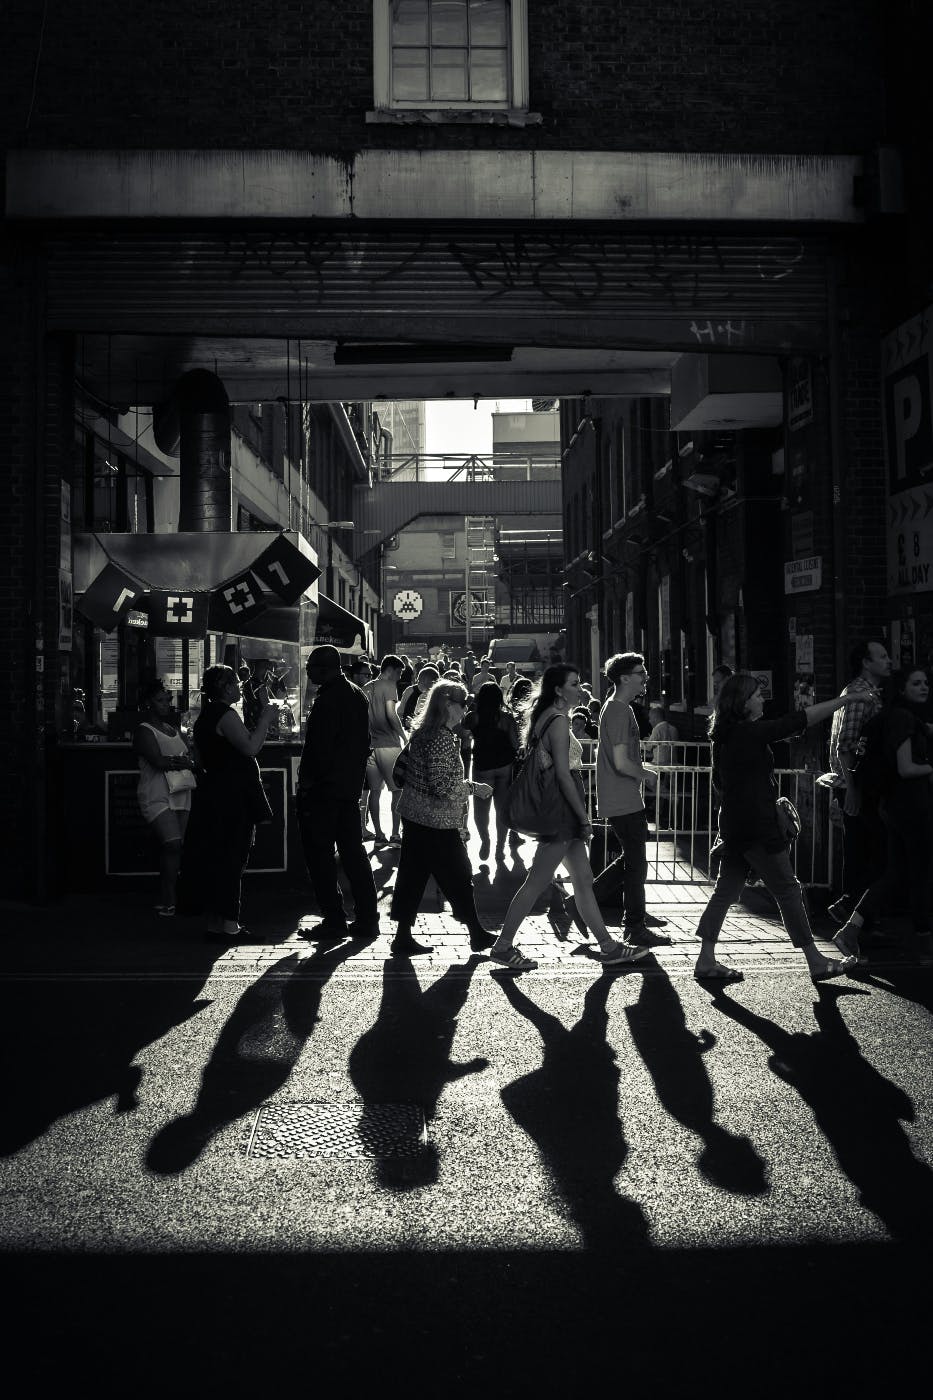 Grey scale image of a crowd crossing a street in front of a marketplace